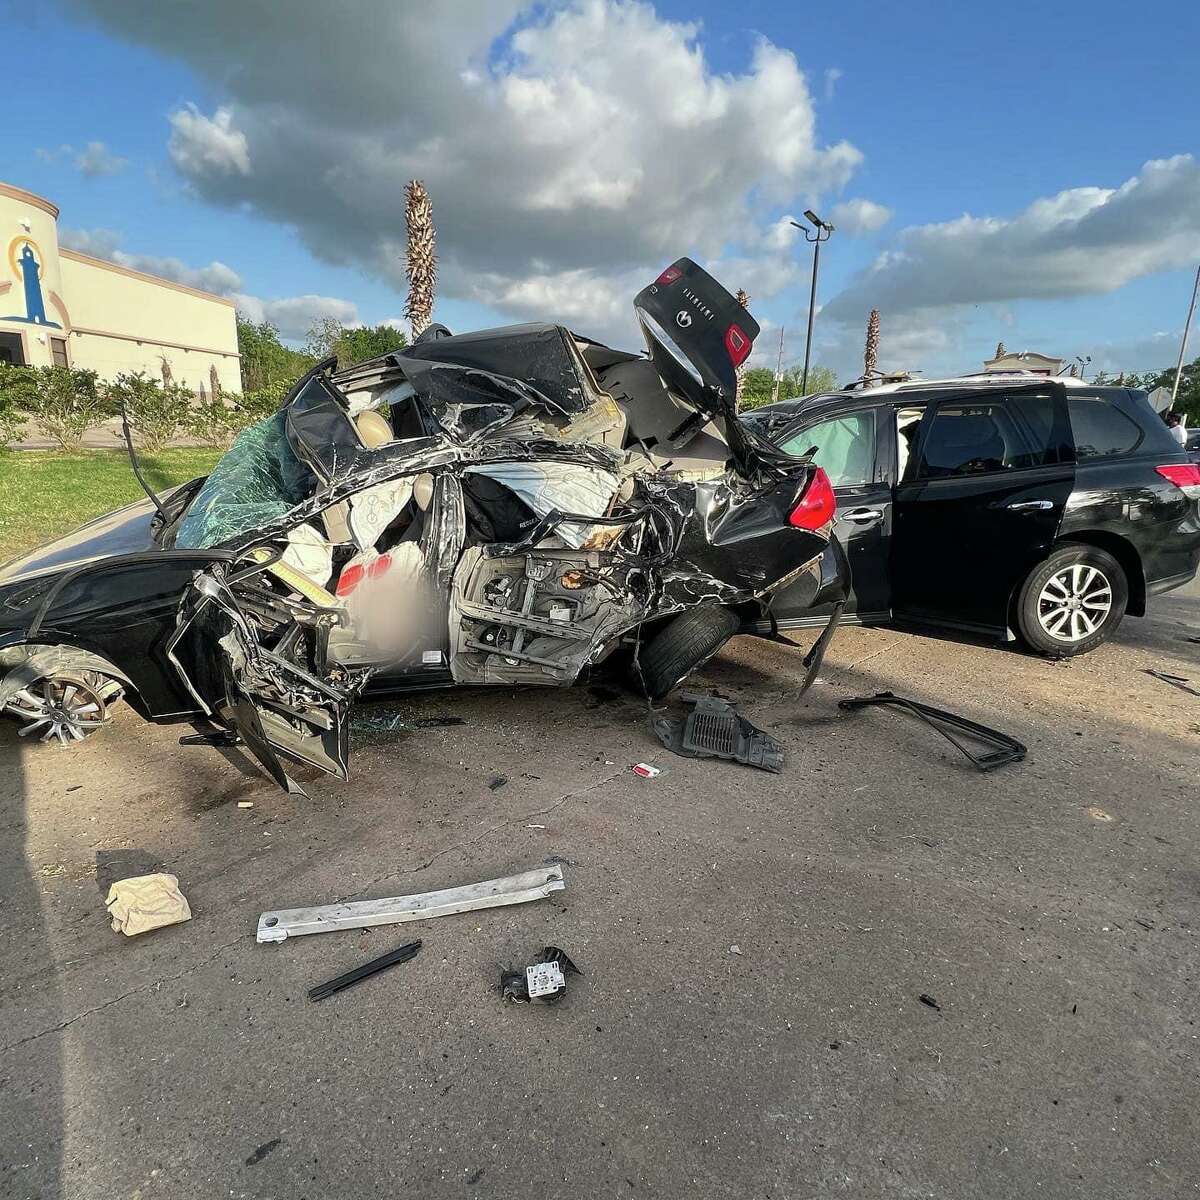 A three vehicle crash at the 4900 Blk. of Greenhouse Road. Pedrie Wannenburg, a former South Africa rugby player, has died after his car was struck by a teenage driver who was fleeing from police outside Houston. He was 41.